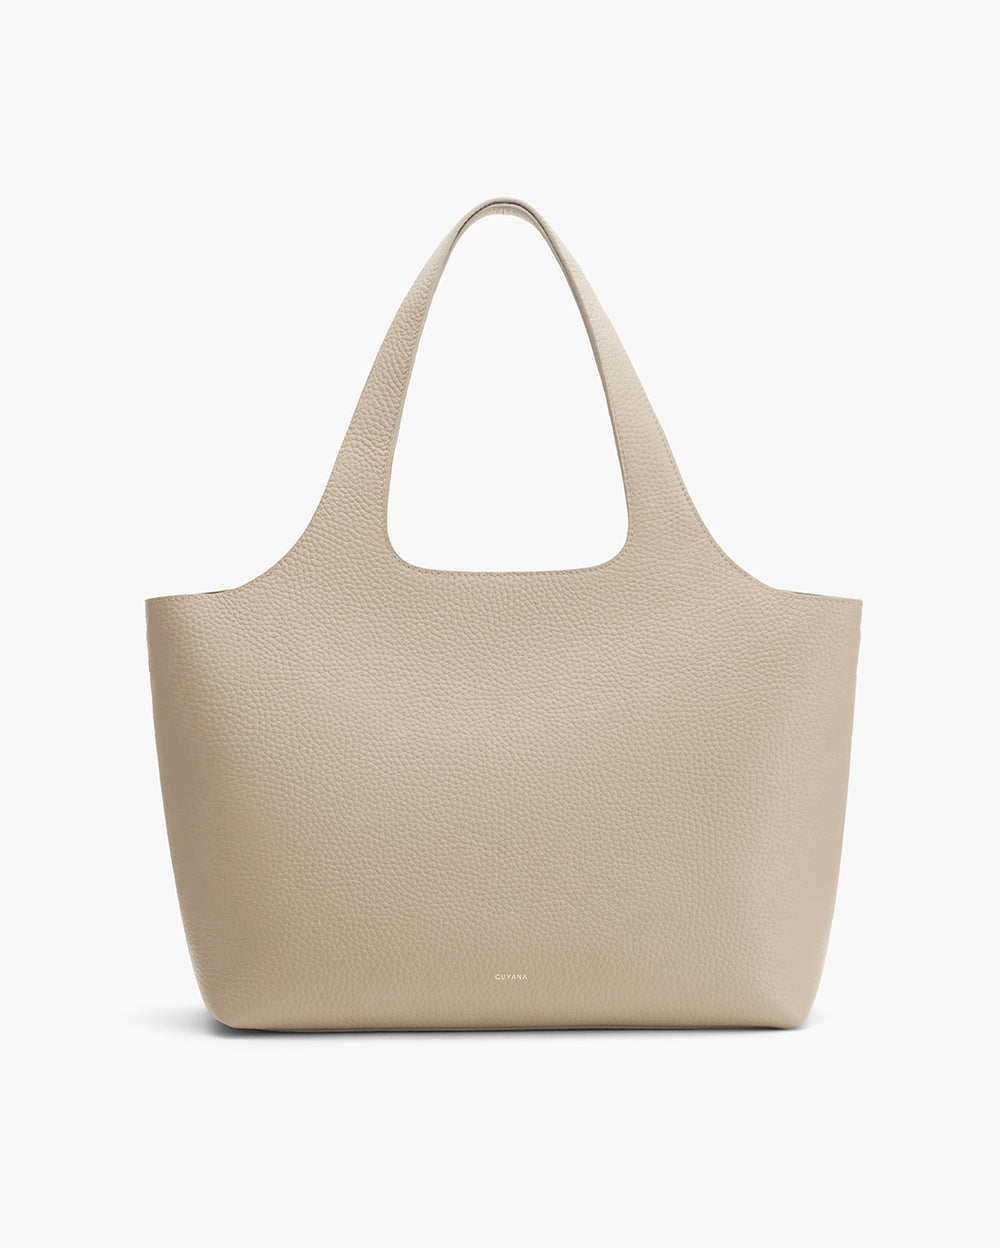 Large tote bag with a single handle standing upright